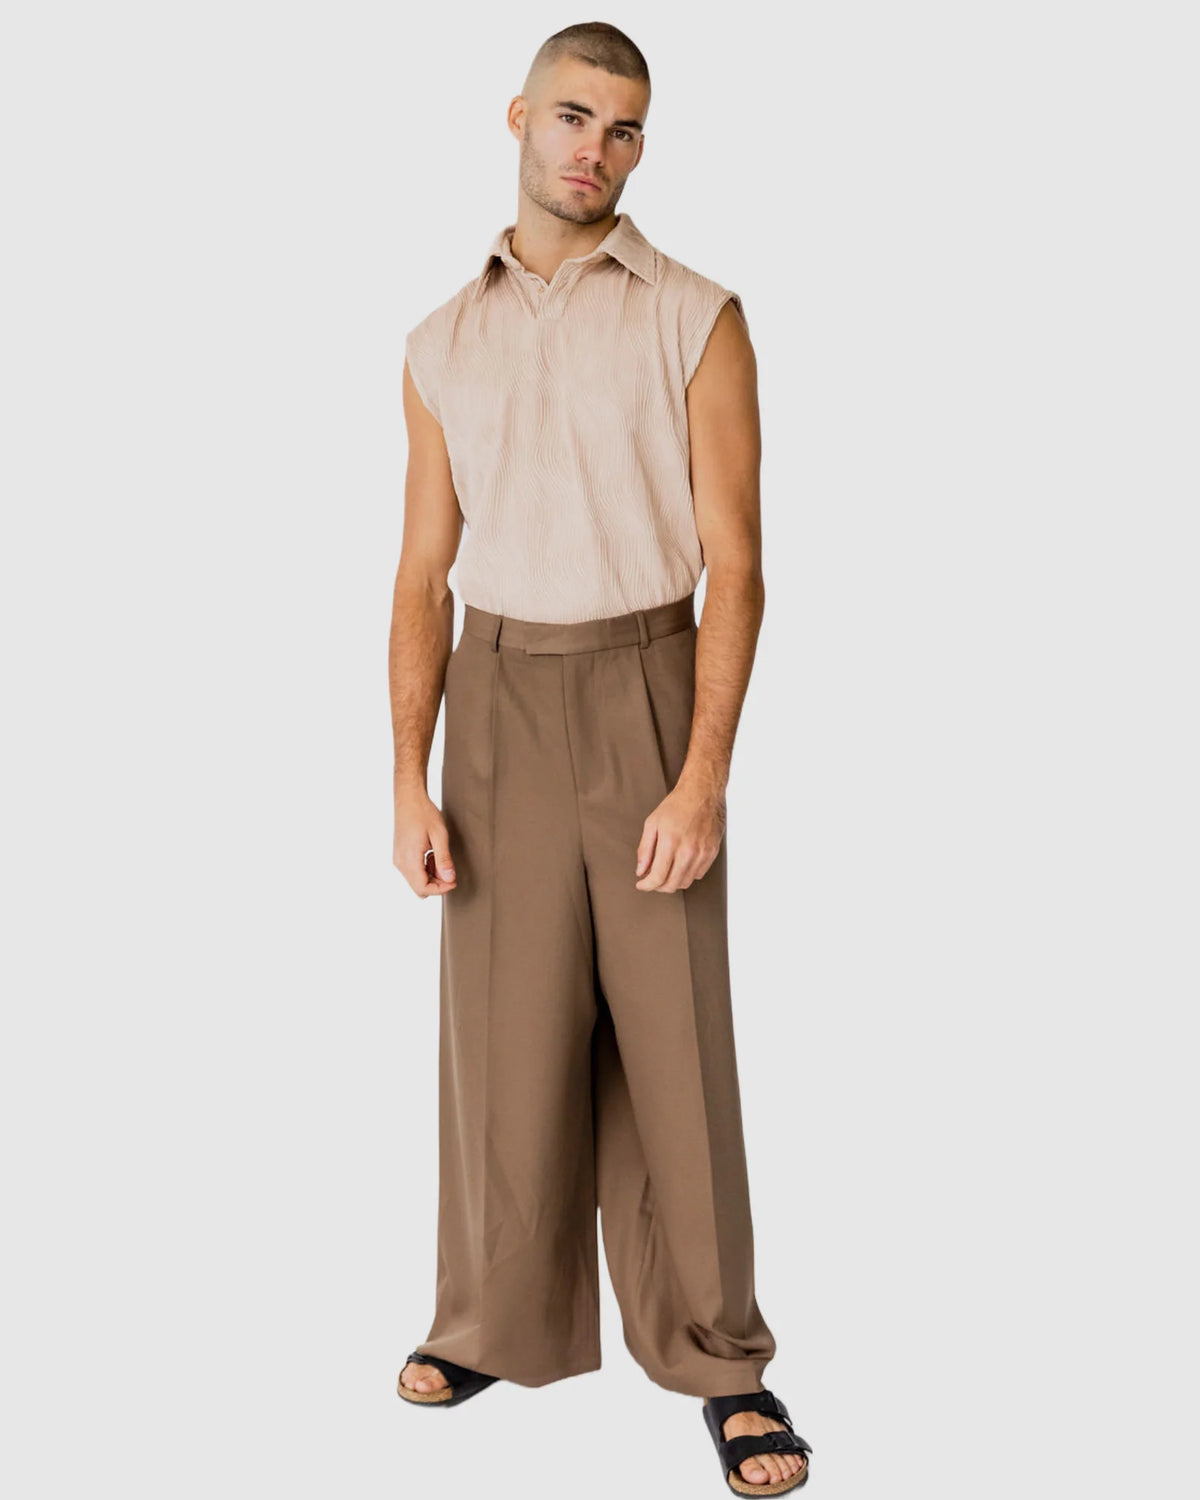 Justin Cassin Verve Sleeveless Shirt in Brown Color 2